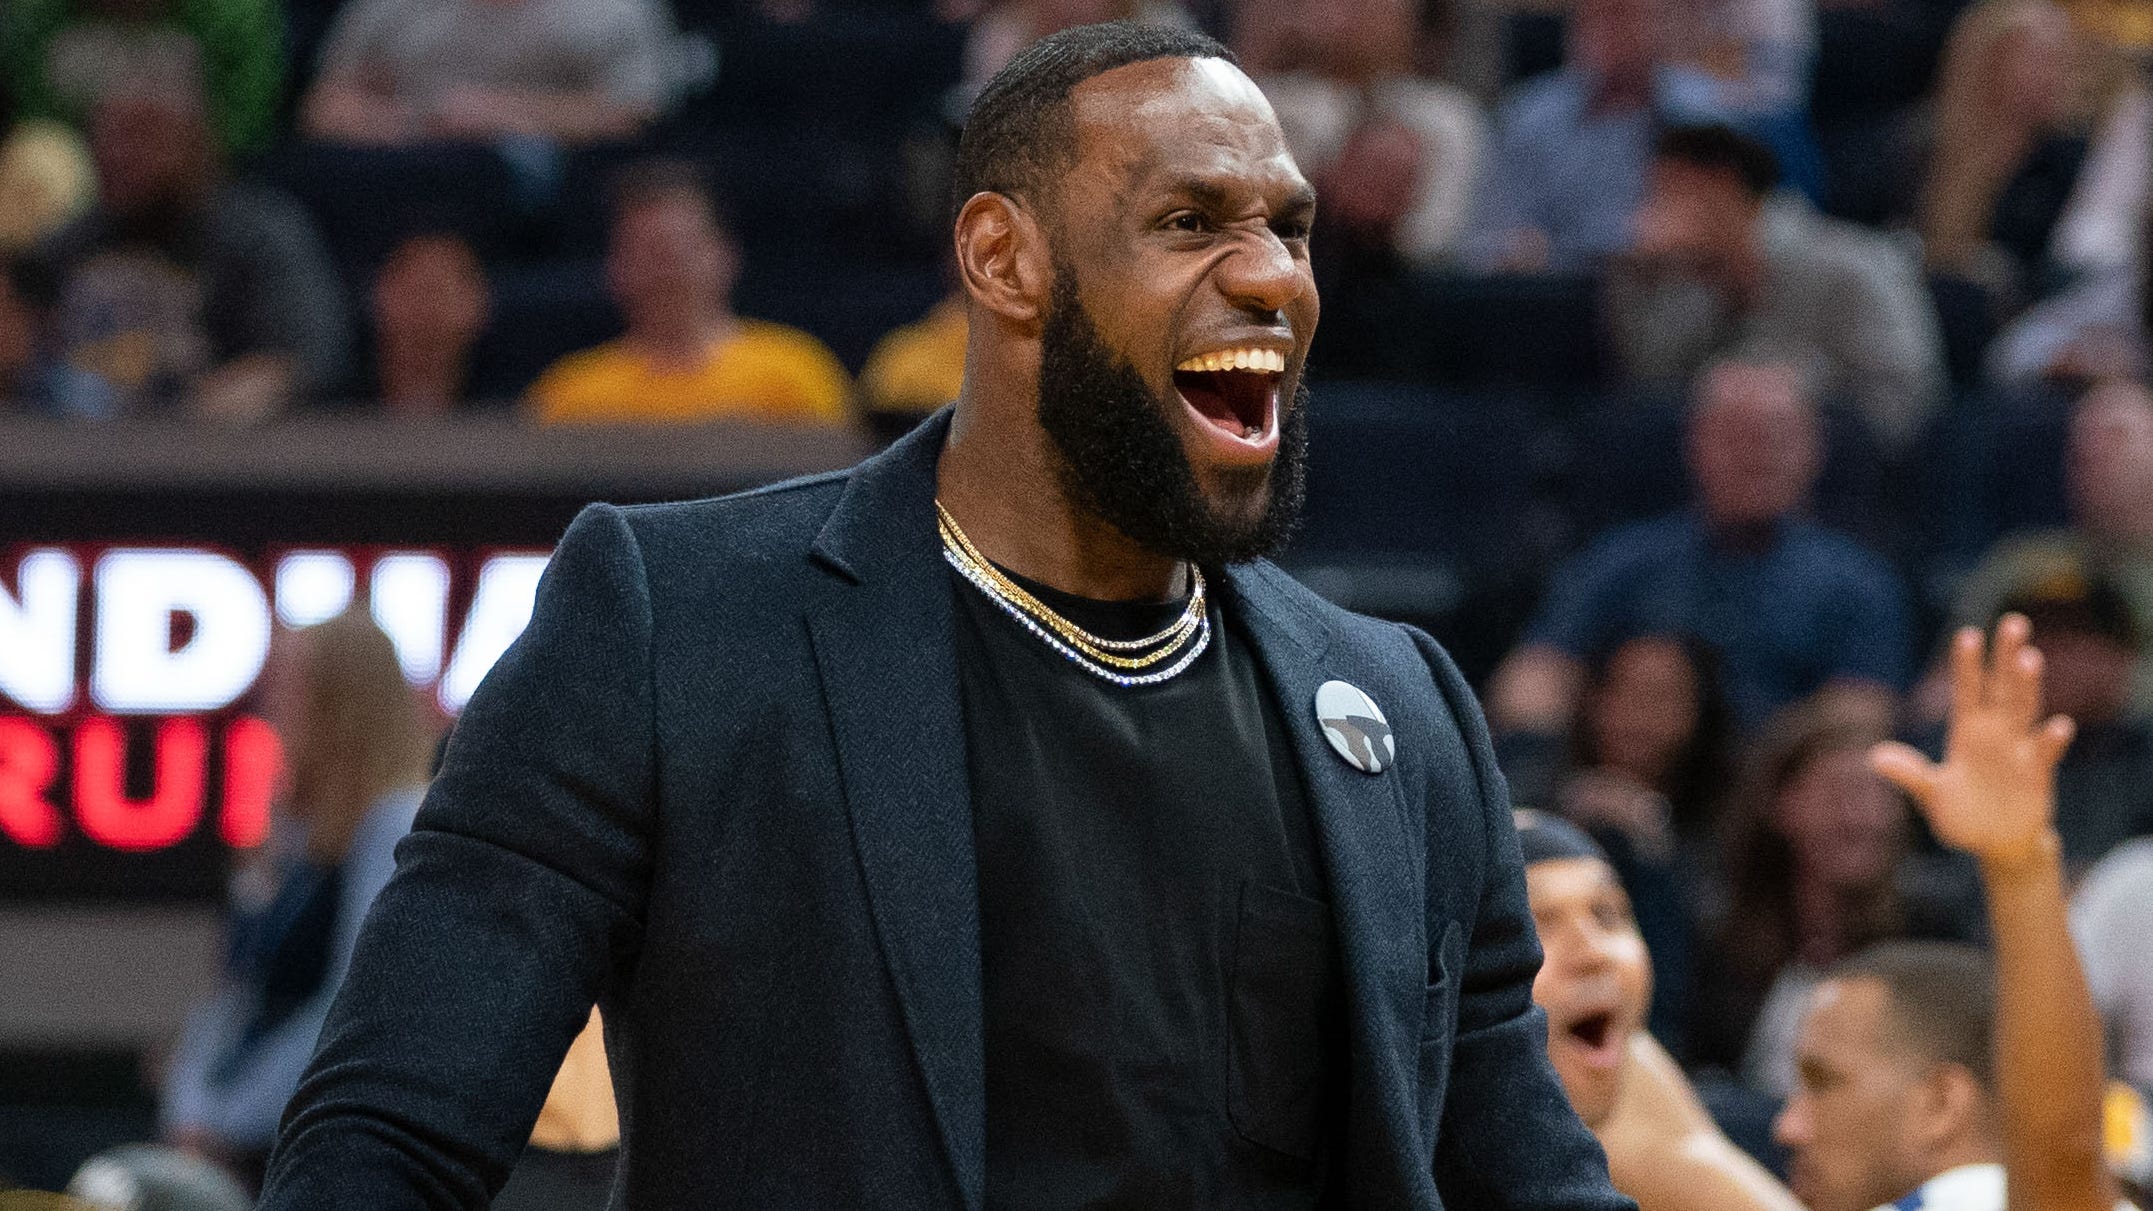 LeBron James calls out Fox News host Laura Ingraham for defending Drew Brees: 'Tired of this treatment' - USA TODAY